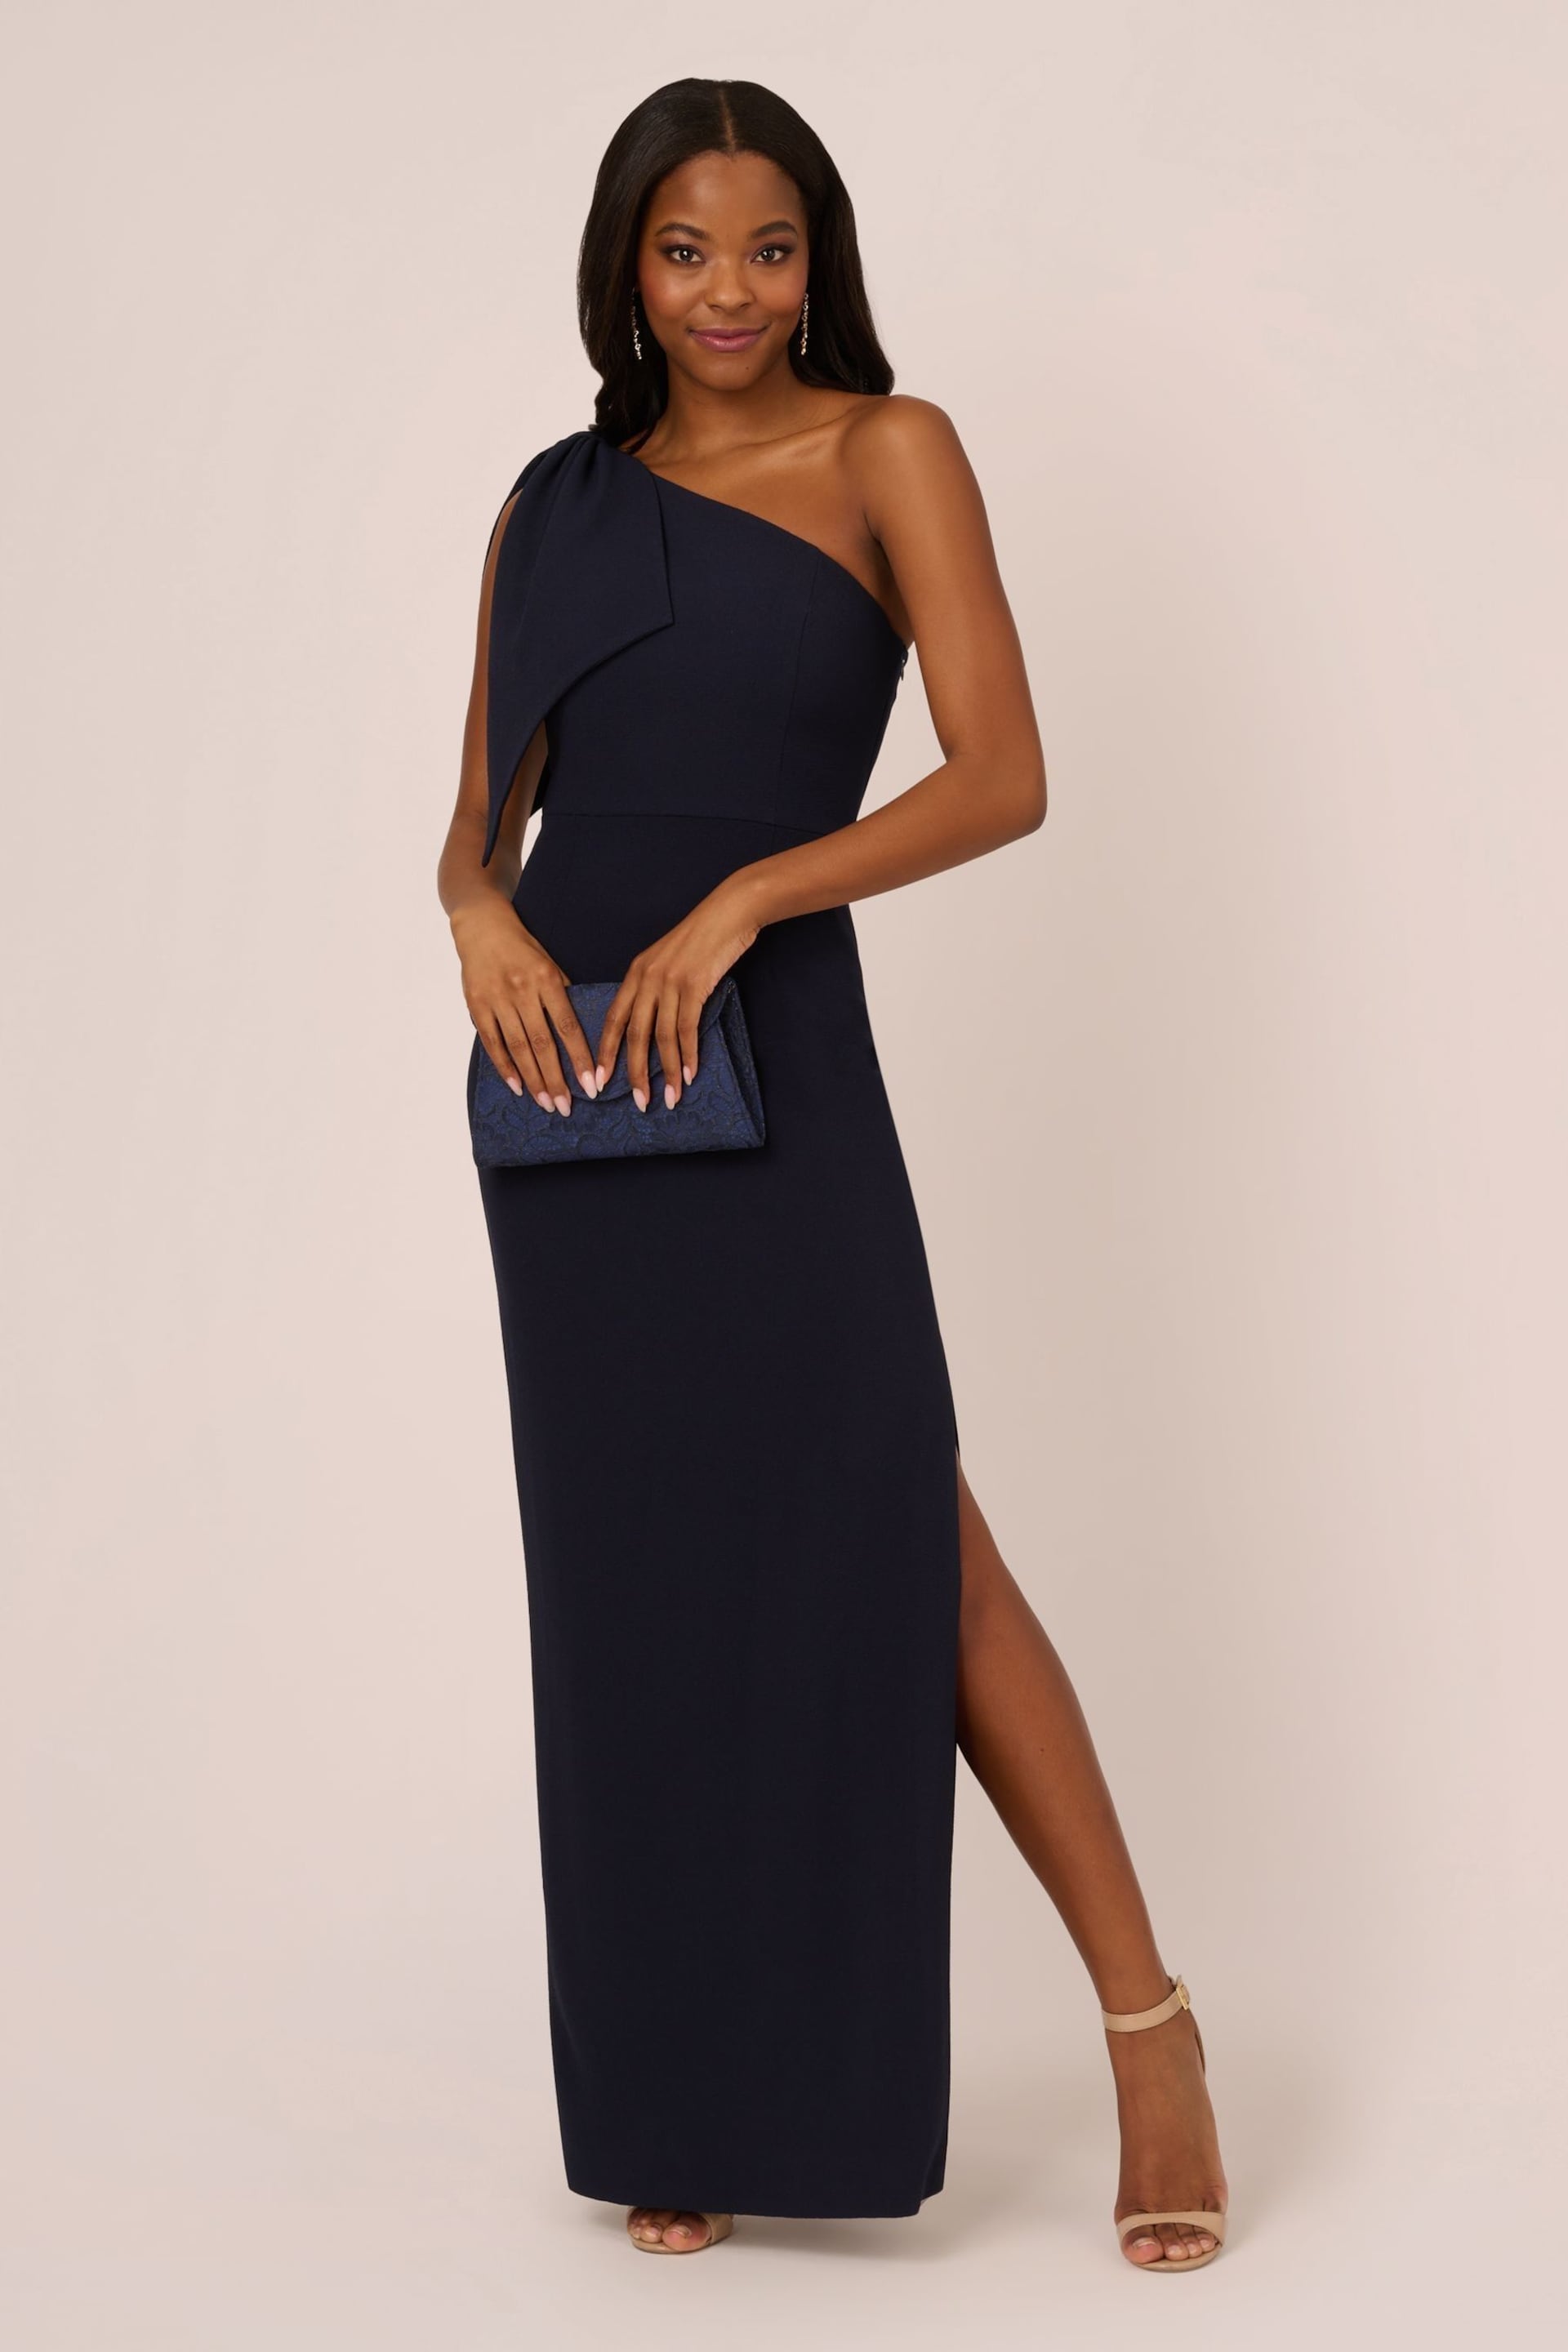 Adrianna Papell Blue One Shoulder Gown - Image 4 of 7